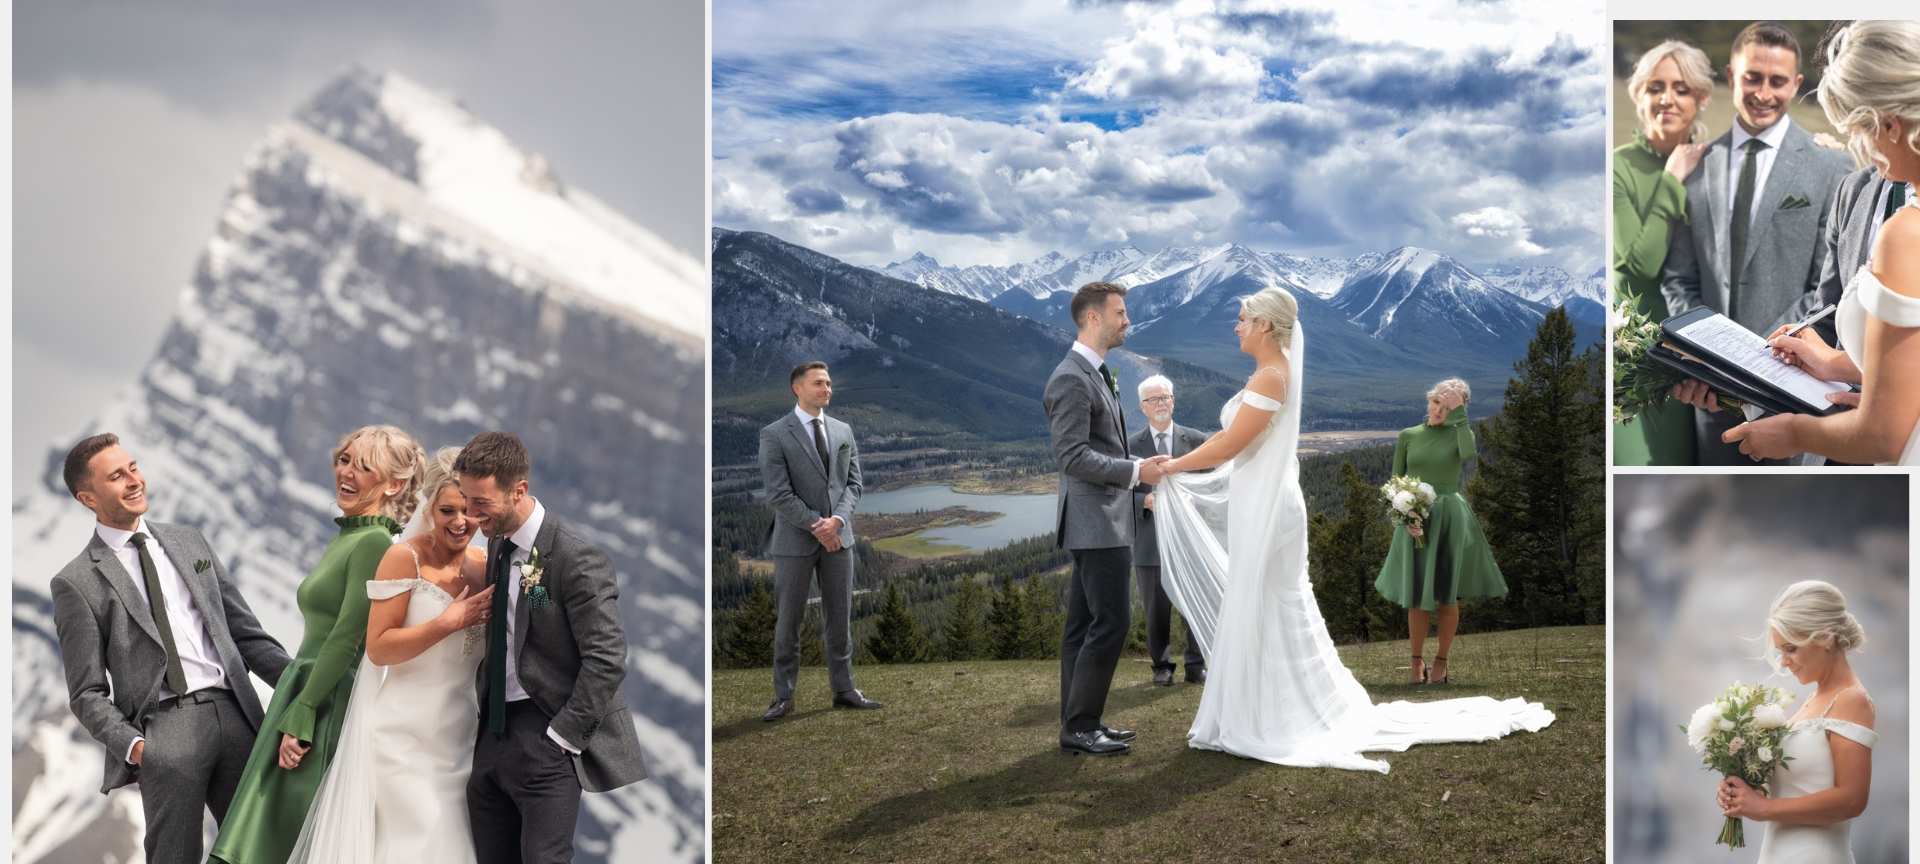 rocky mountains elopement wedding in canada - banff national park